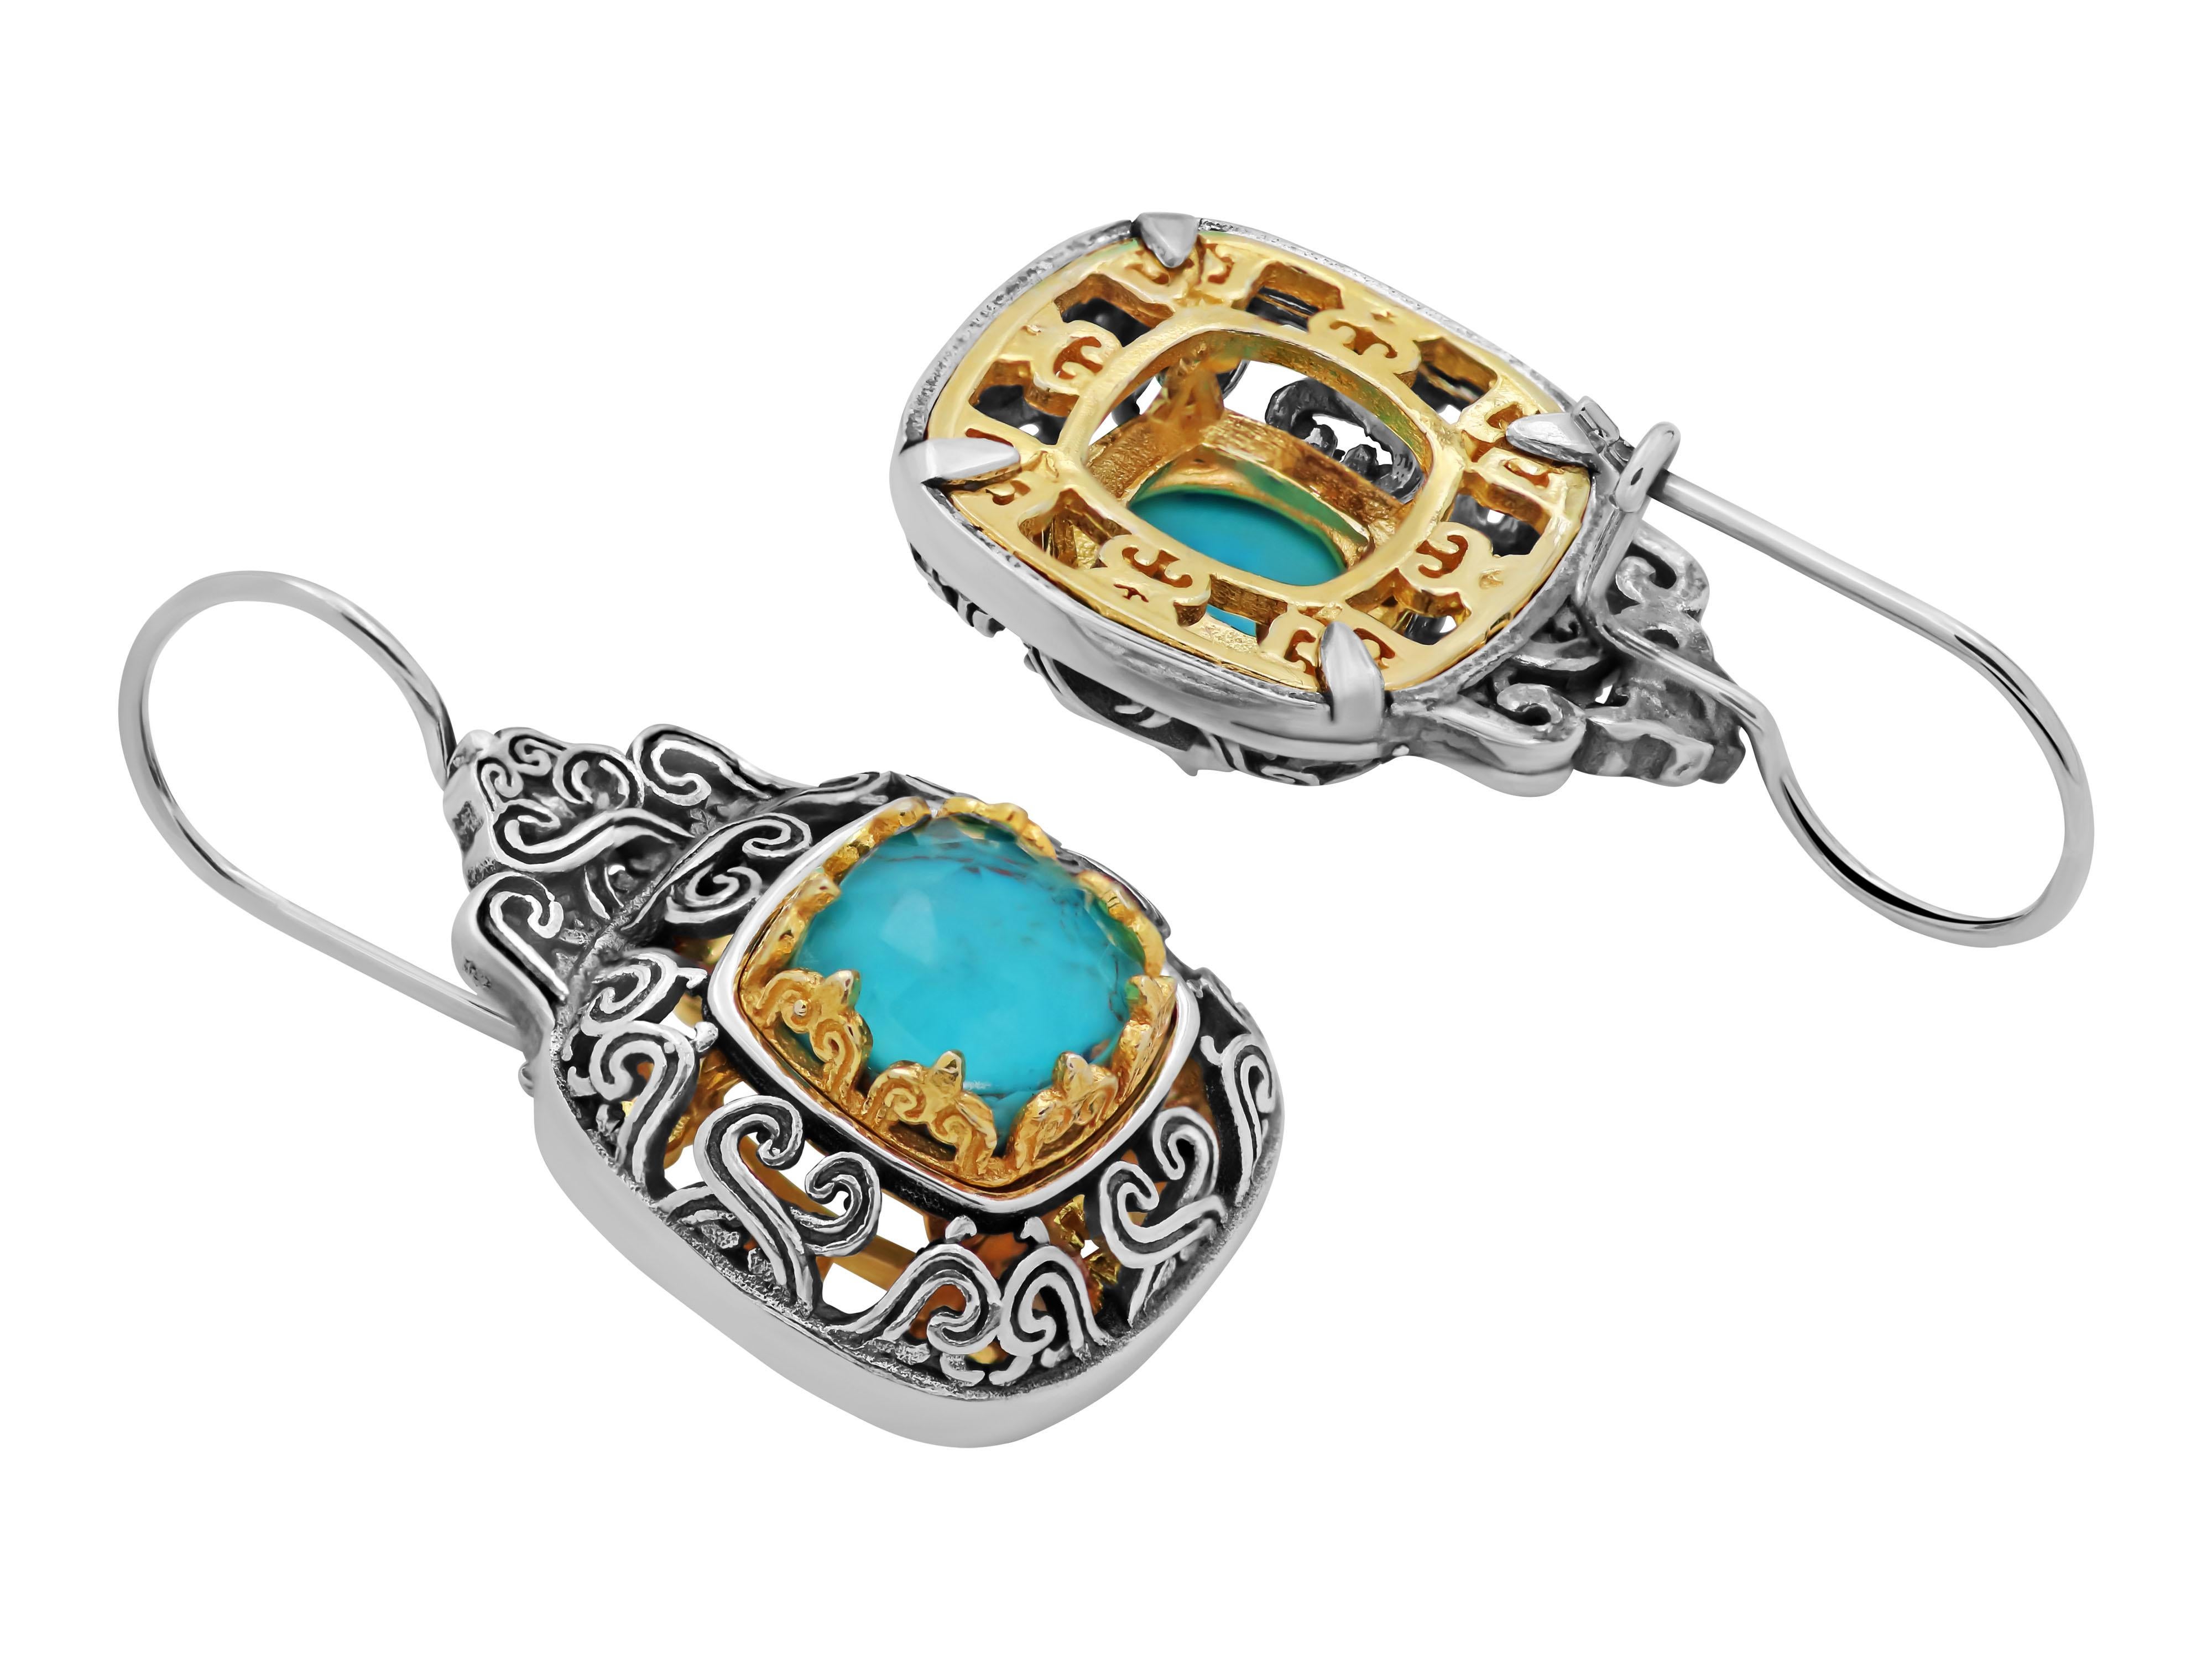 Sterling silver Byzantine earrings with an intricate detail and gold plated features that enhance the beauty and the level of work. Set with copper turquoise, a stone that makes it even more interesting.